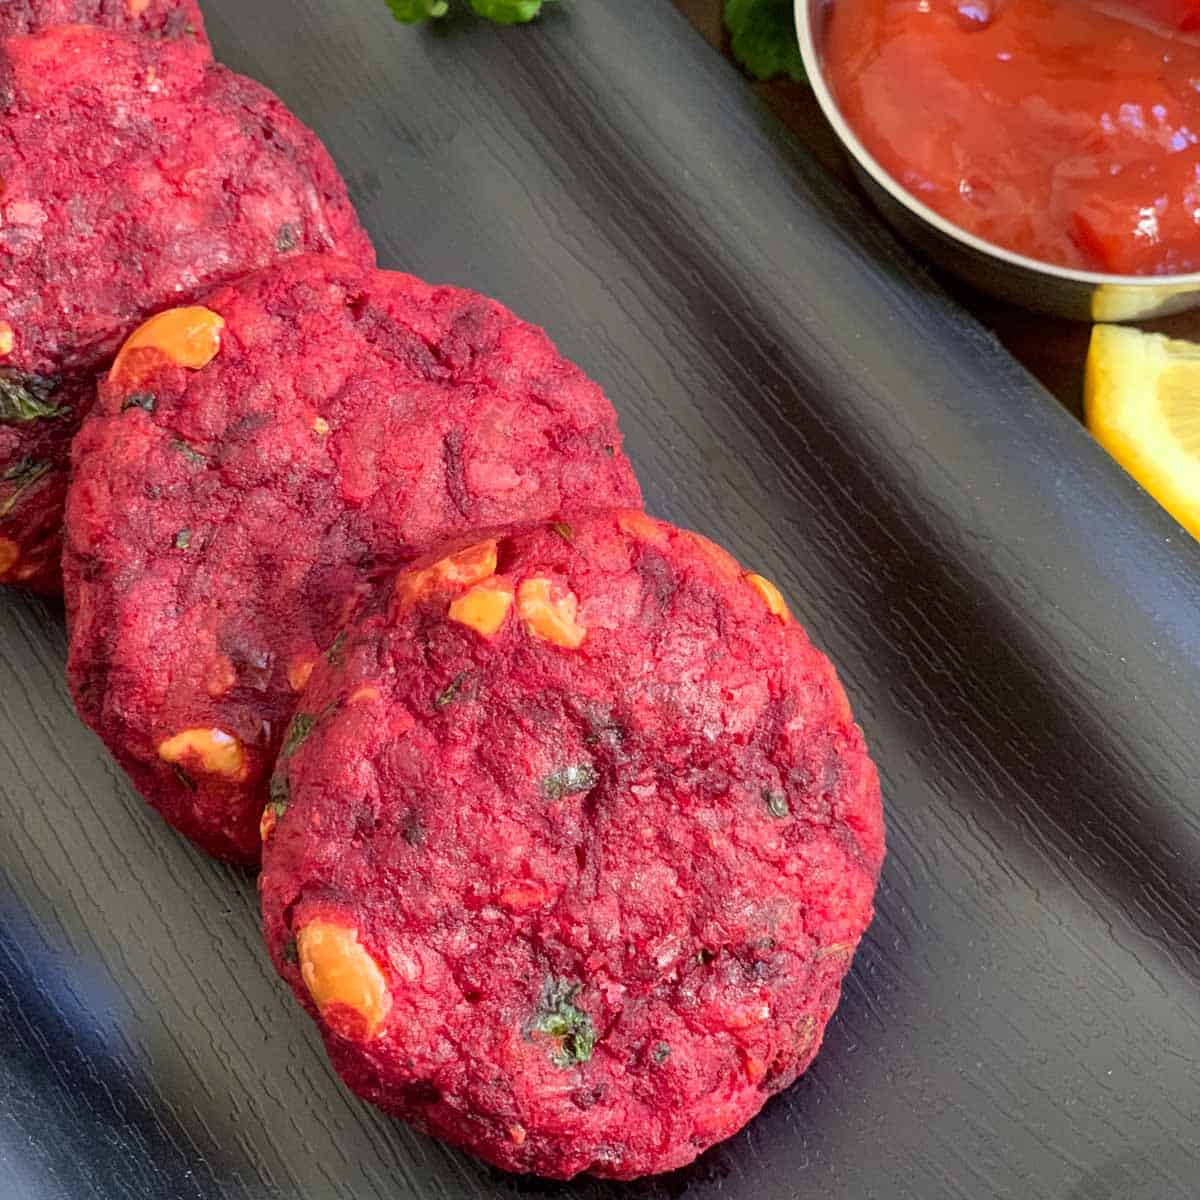 beetroot cutlets arranged in a row on a black plate with ketchup on the side